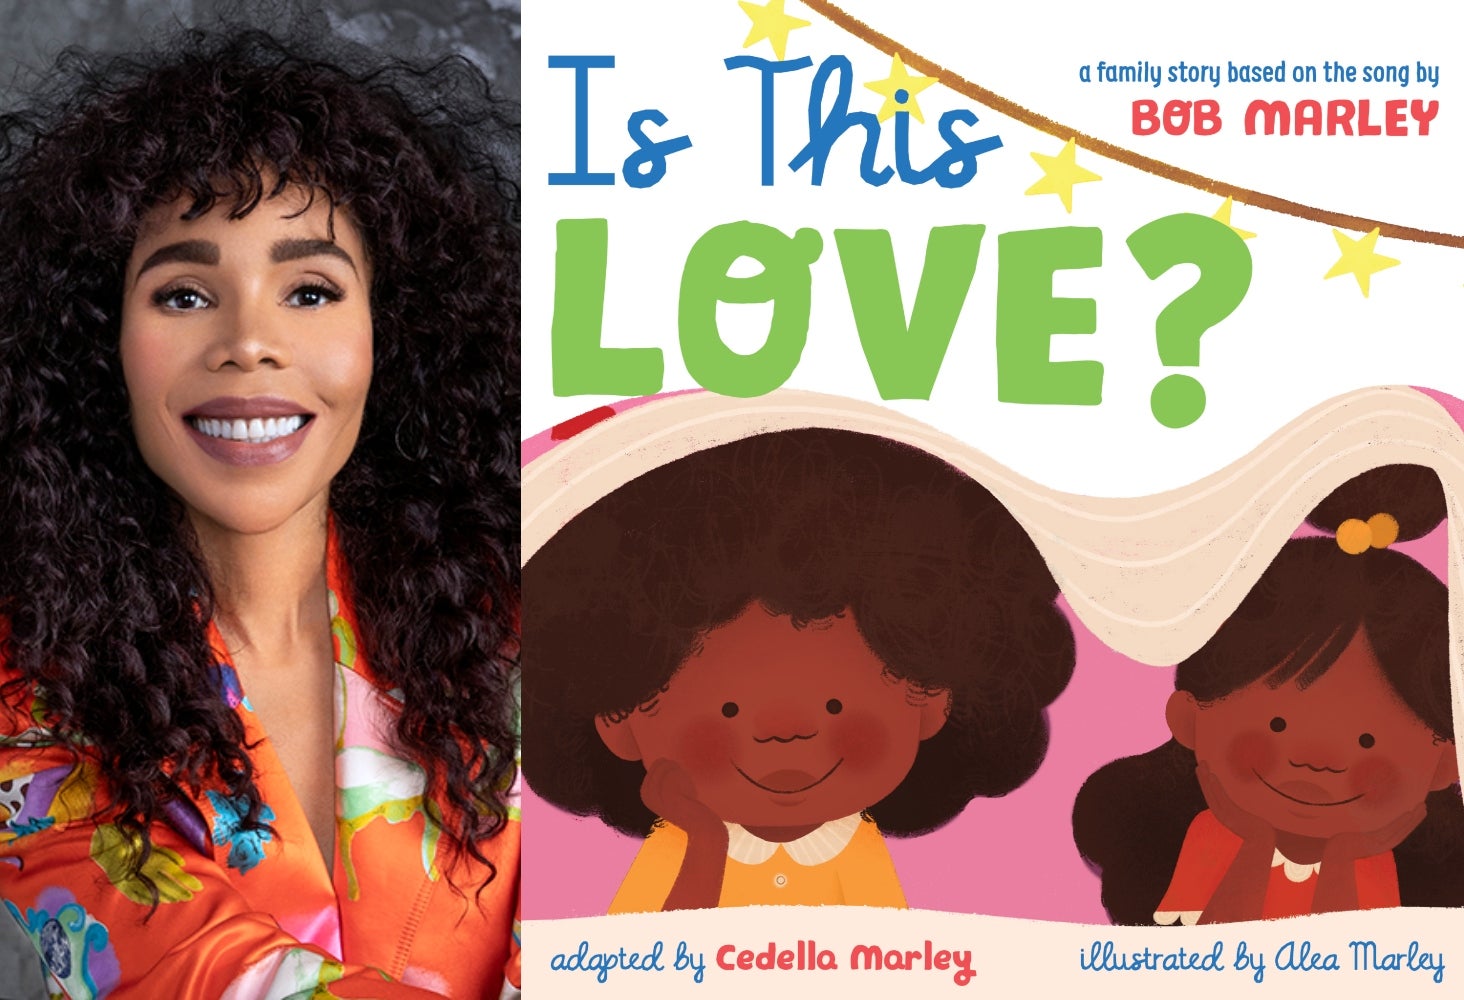 Cedella Marley On Her Father's Enduring Legacy And The Beauty Of Sibling Bonds In New Children’s Book ‘Is This Love?’